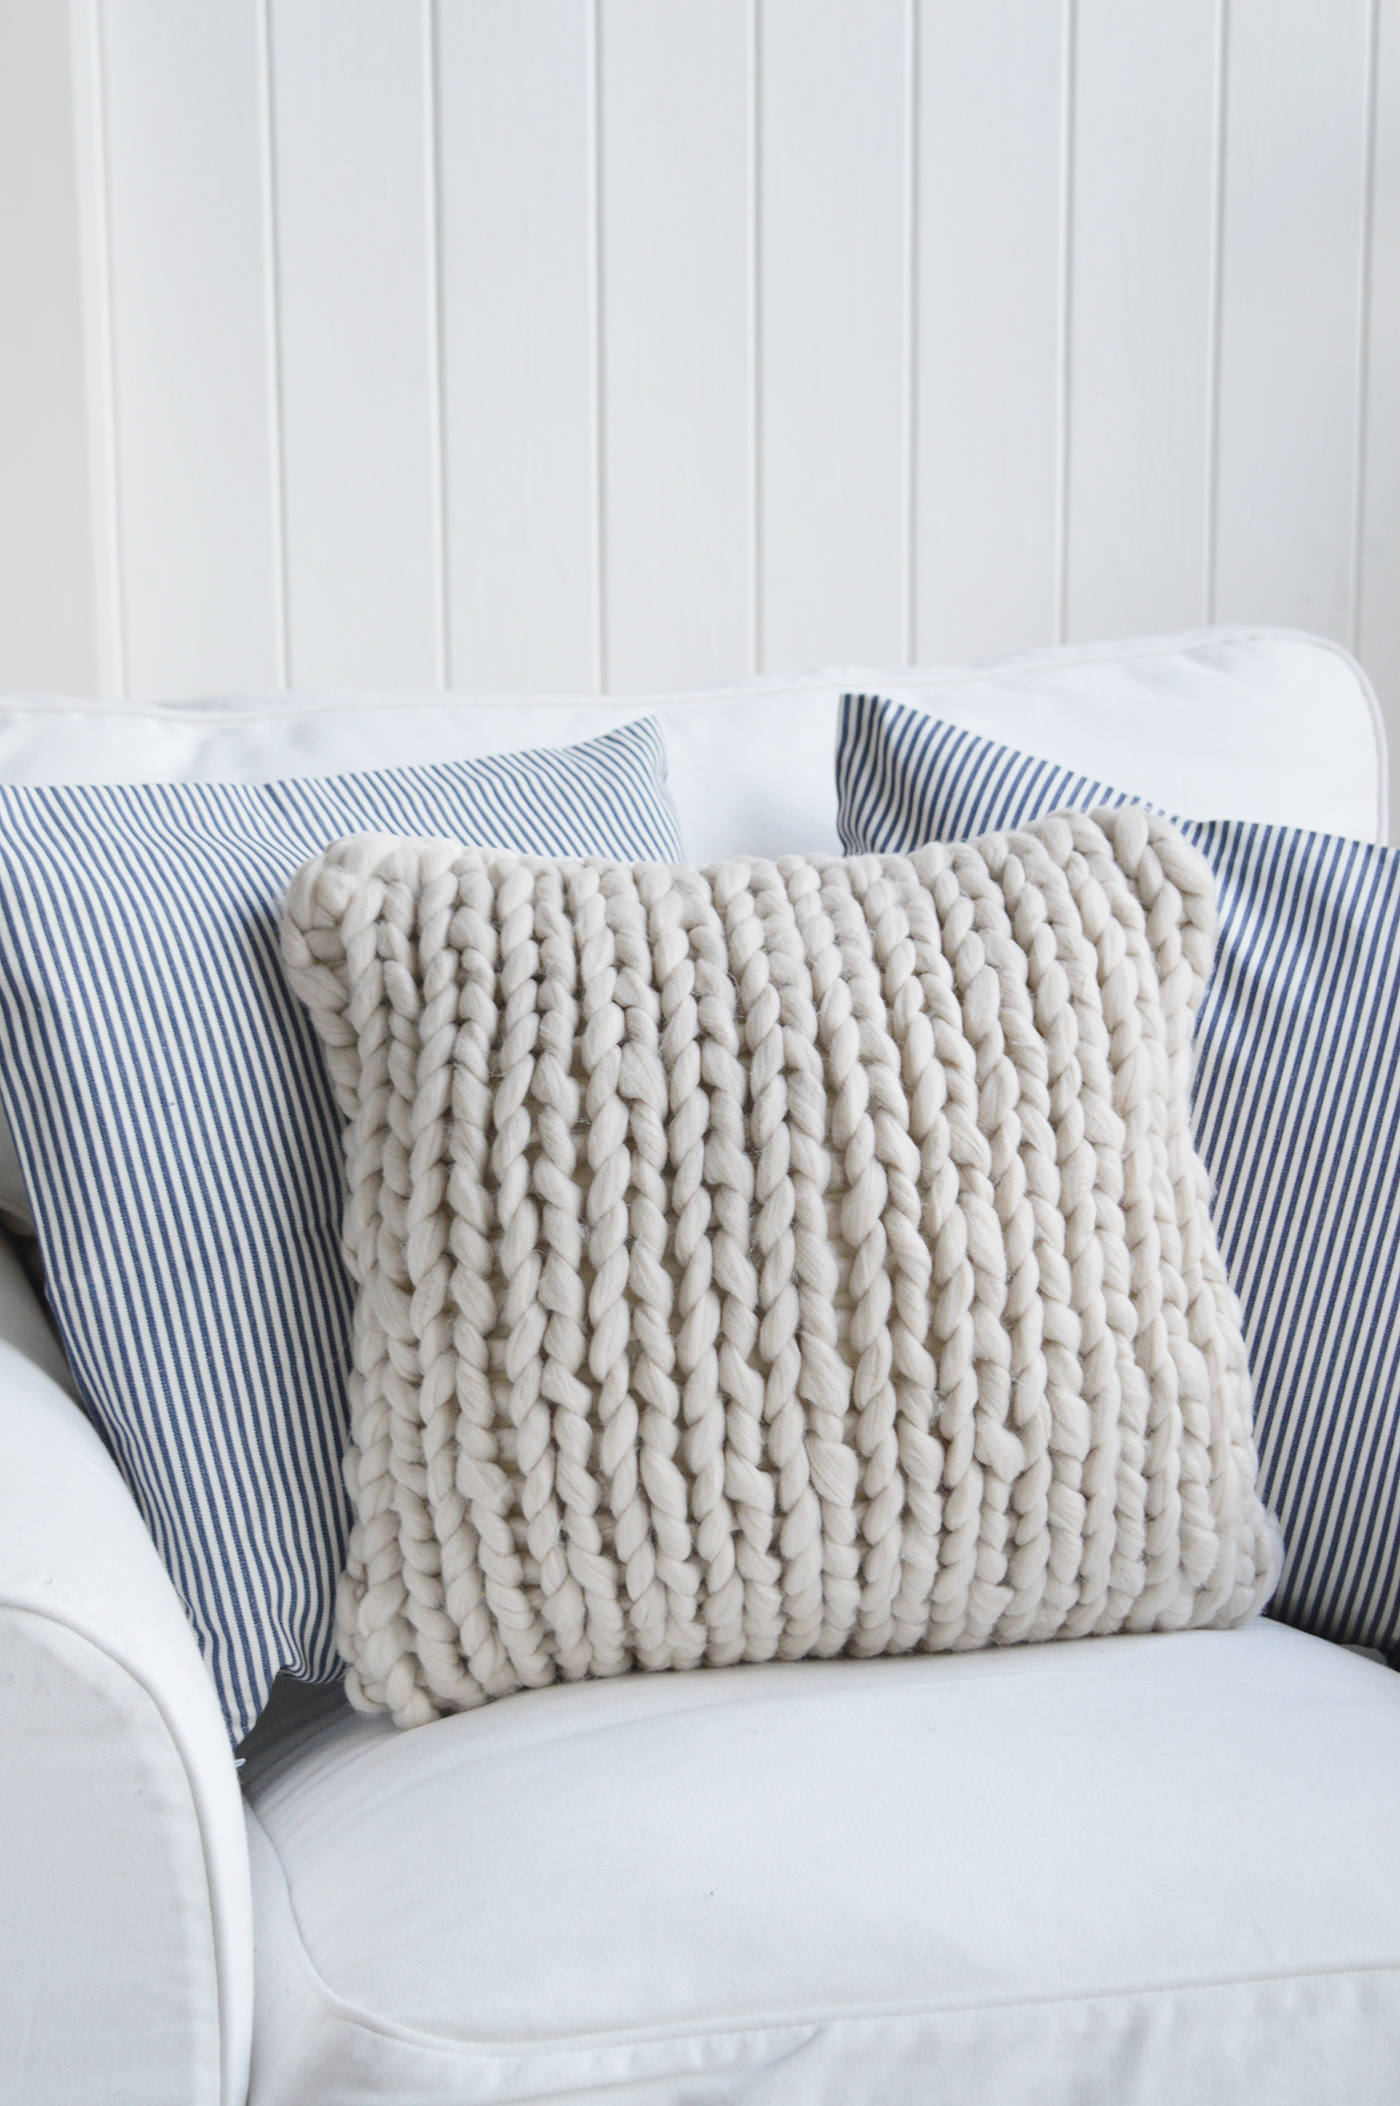 Mayfair Ivory Chunky Knit cushion cover for New England interiors. Relaxed living for homes by the sea and in the country